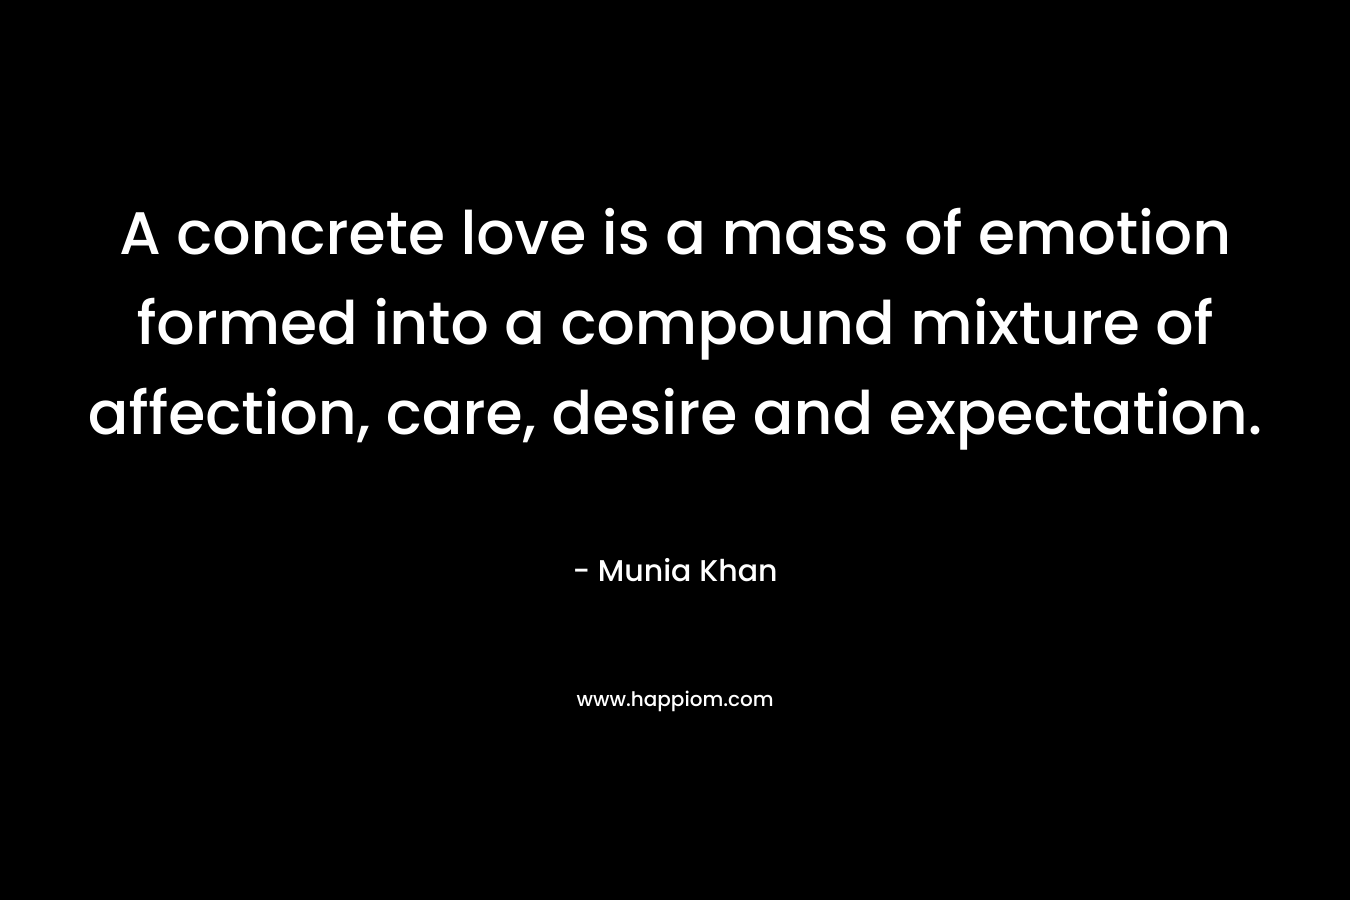 A concrete love is a mass of emotion formed into a compound mixture of affection, care, desire and expectation. – Munia Khan